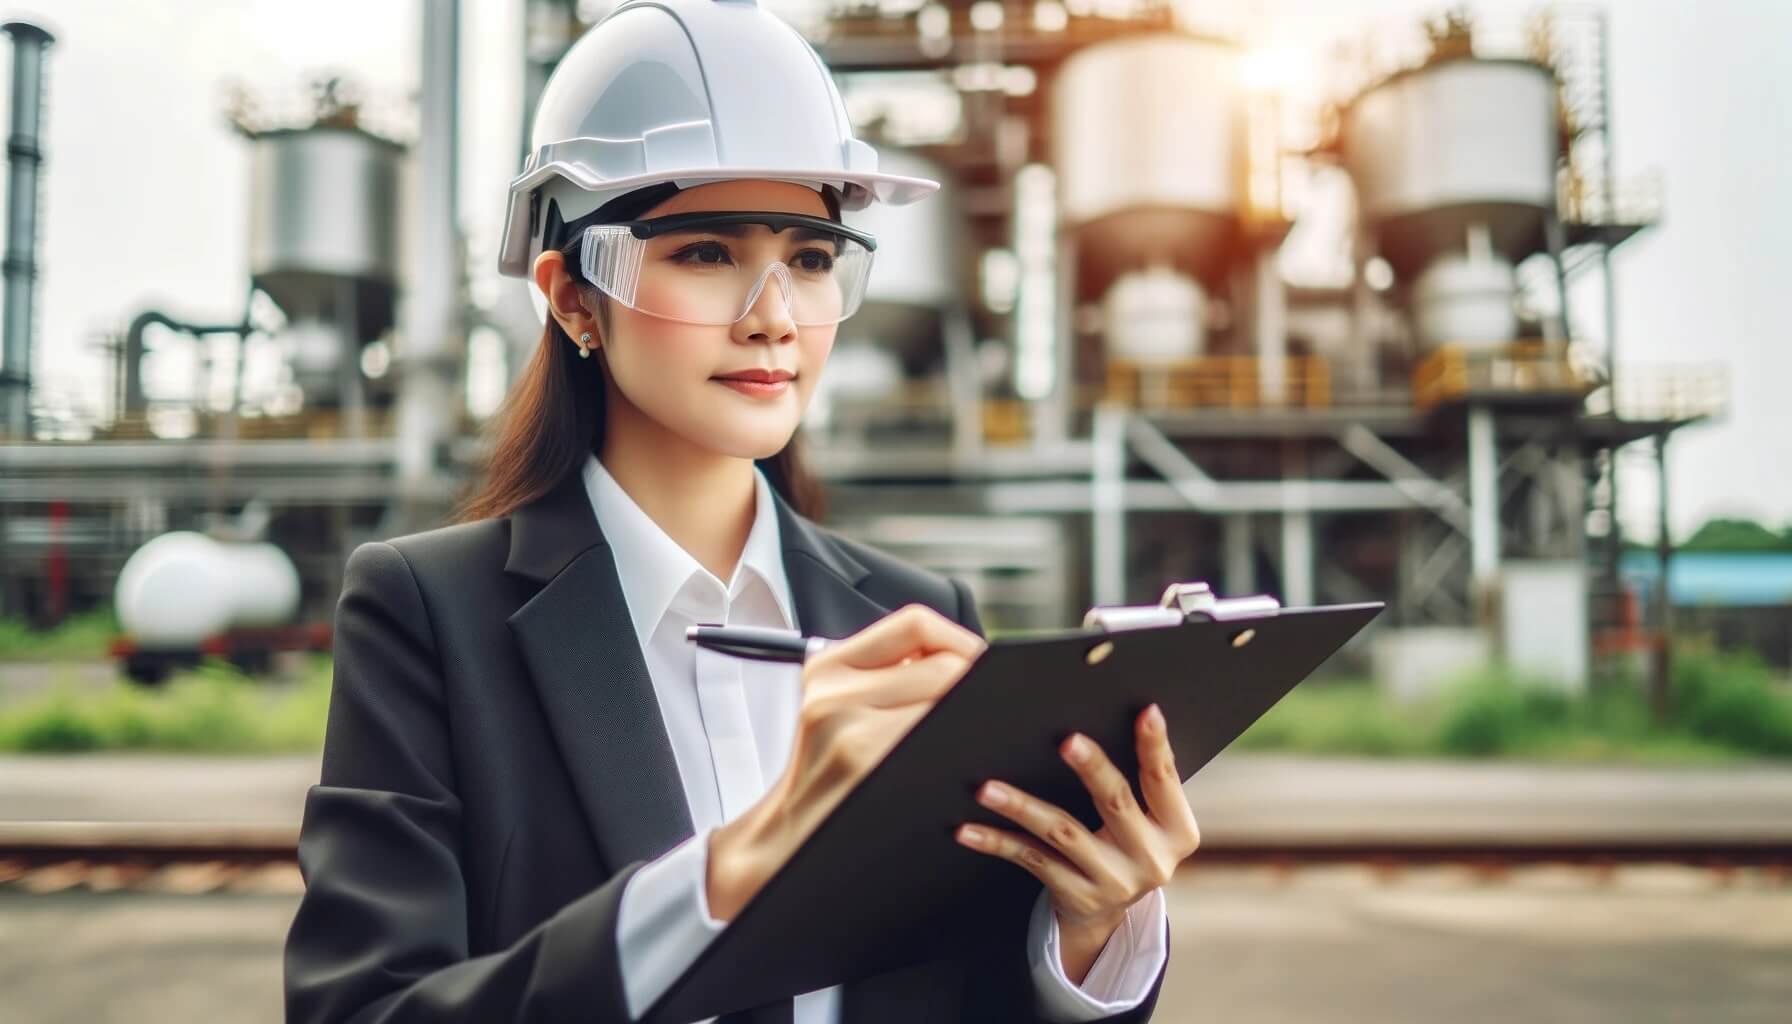 Choosing Appropriate Women's PPE: Ensuring Safety for Head, Eyes, and Ears